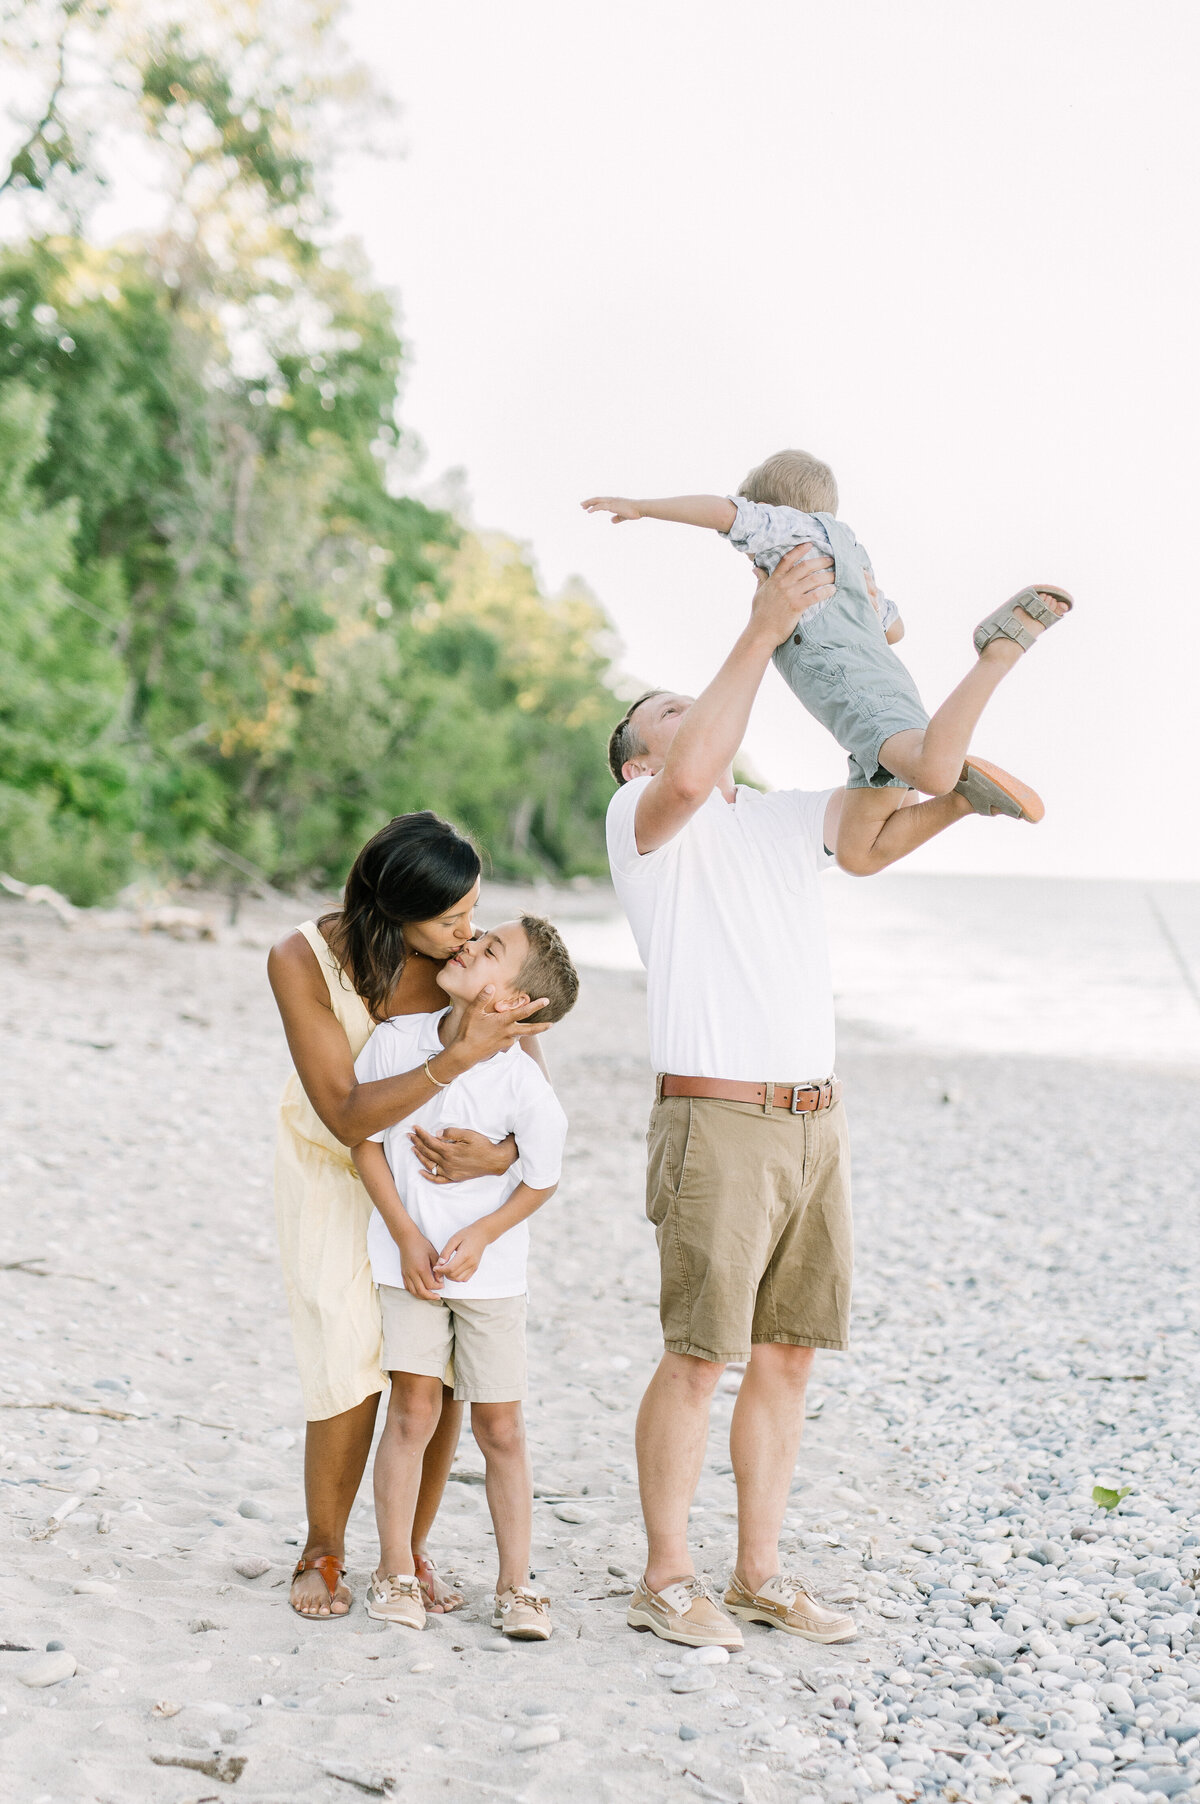 A mom is kissing her son on the beach while the dad is tossing the other child in the air